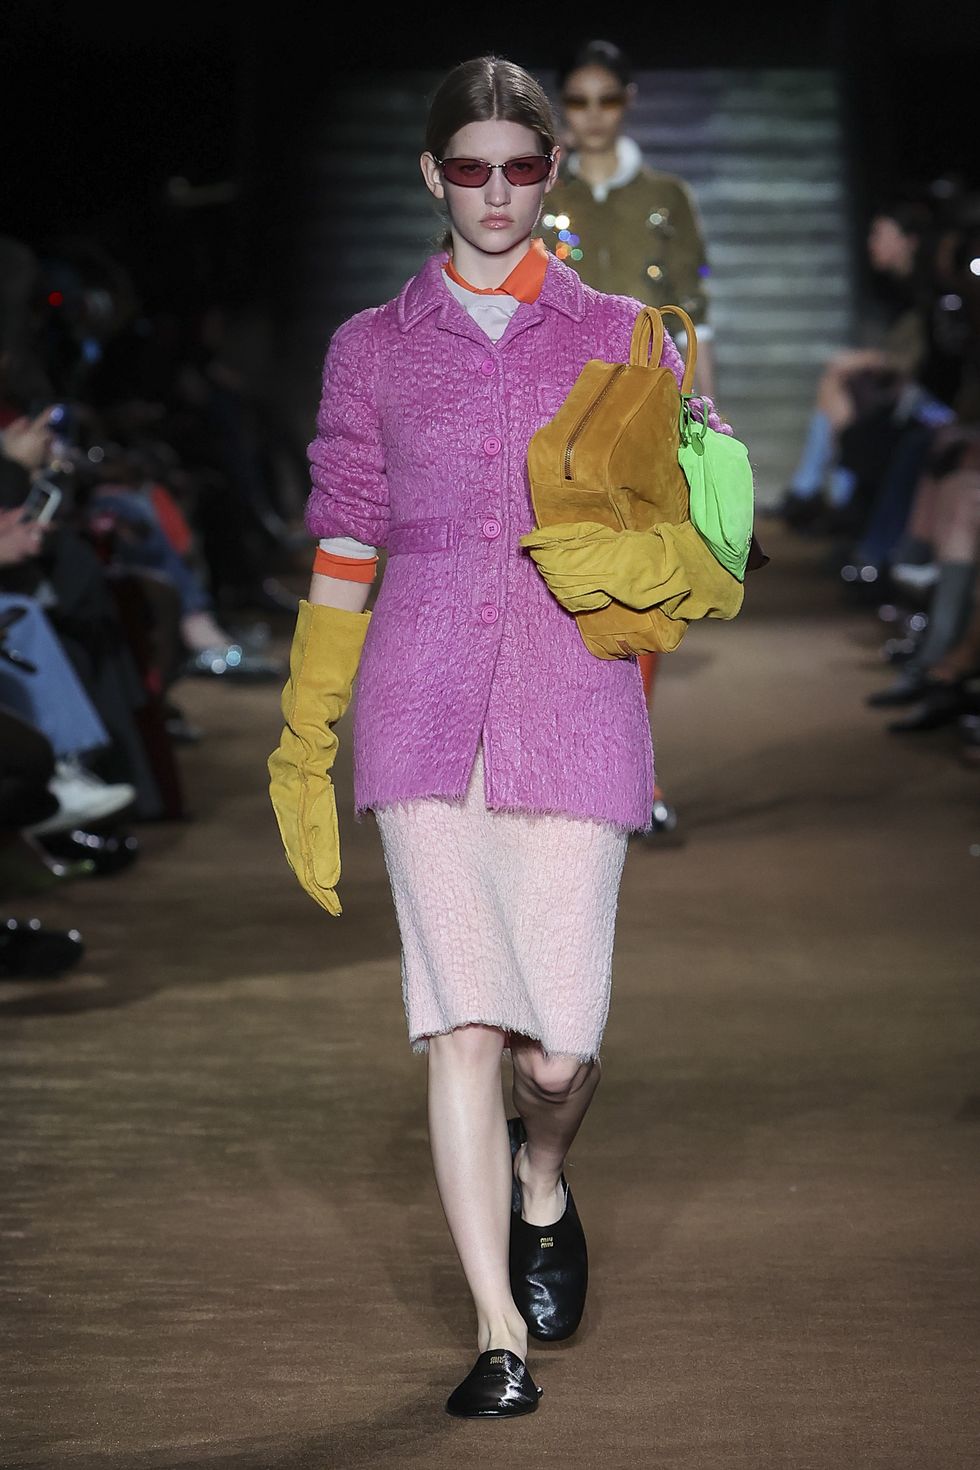 a person wearing a pink coat and sunglasses walking down a runway